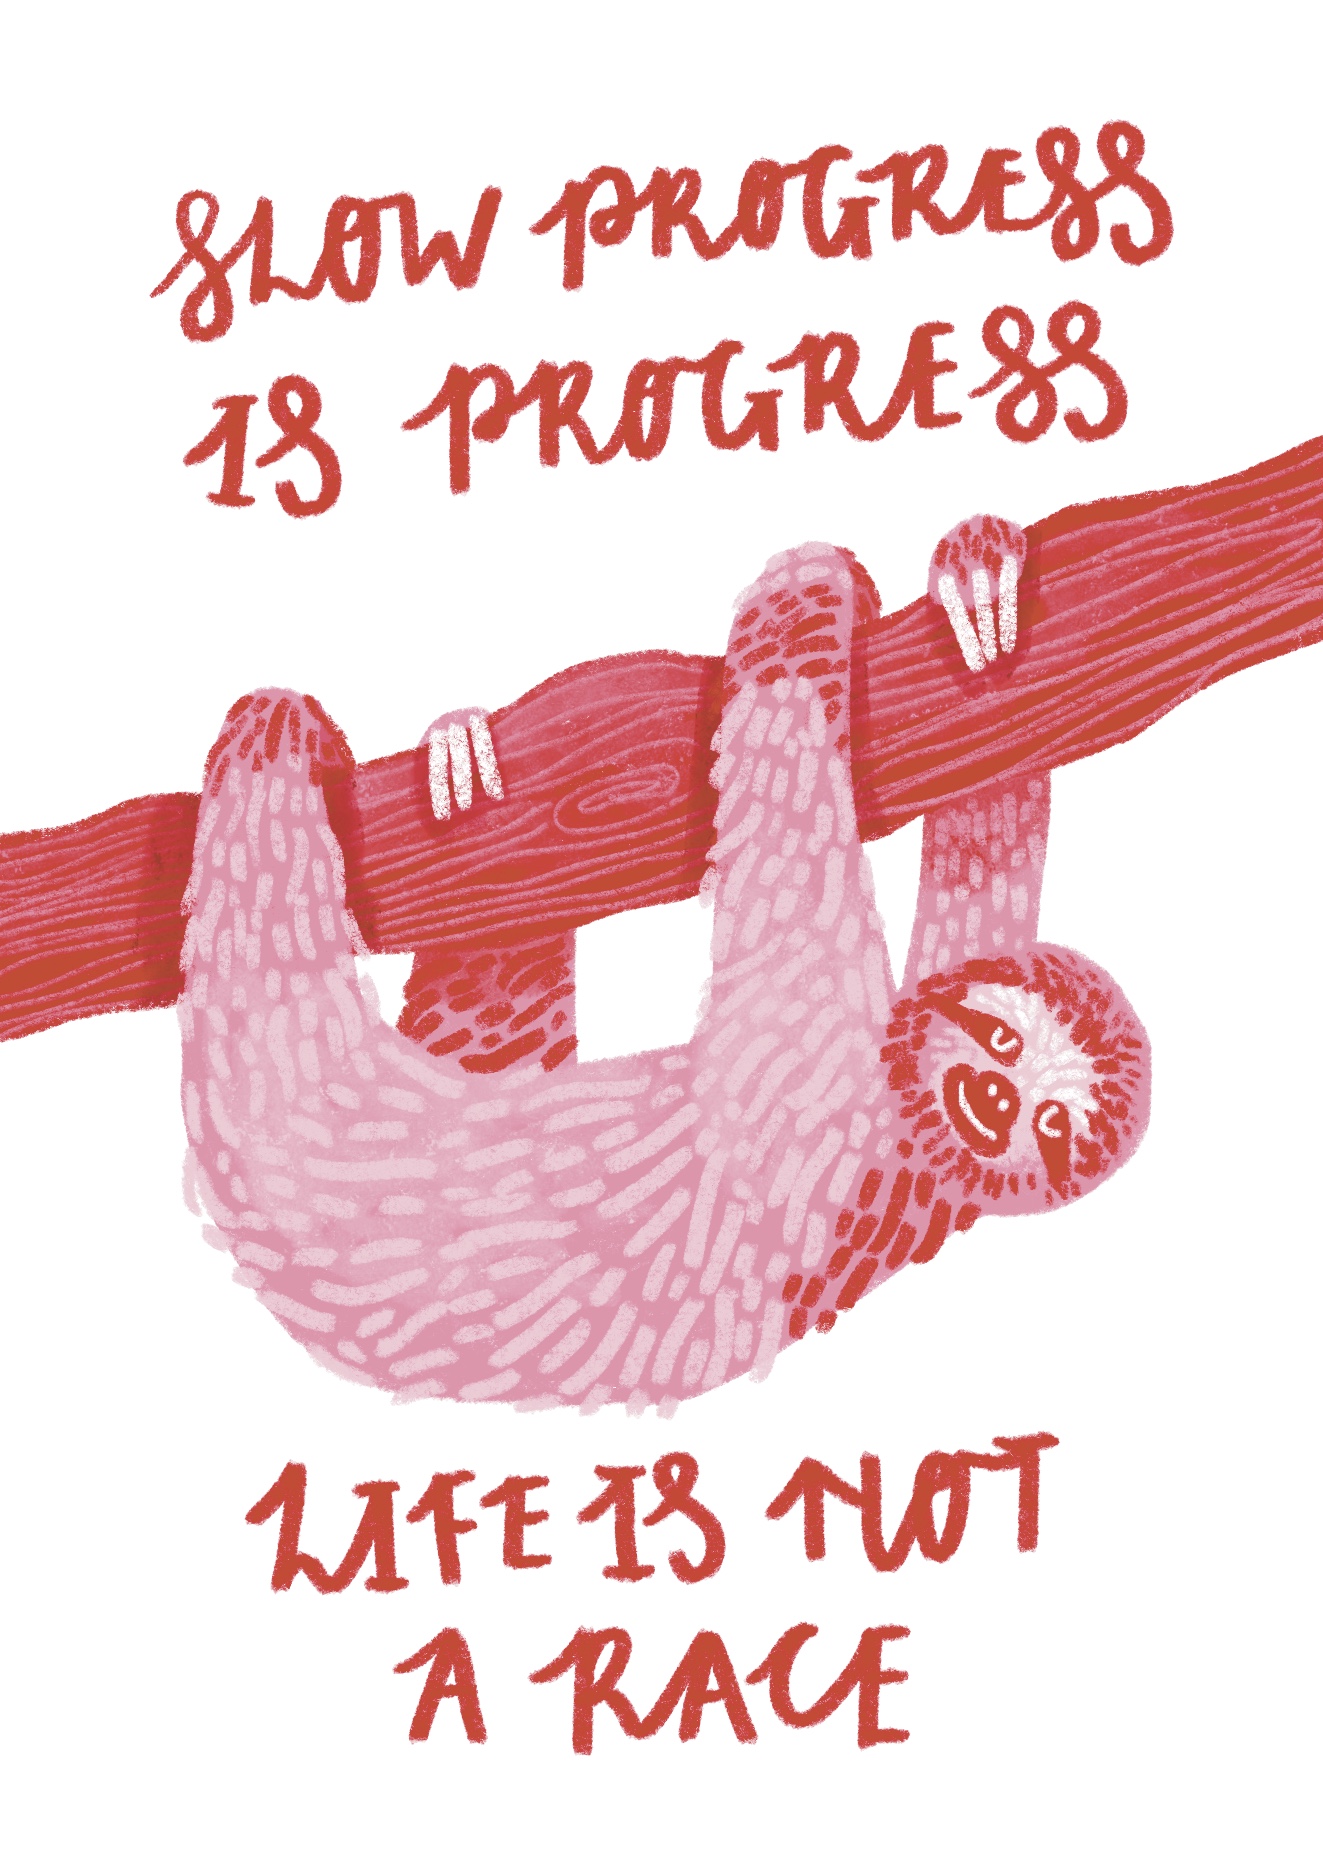 An illustration of a pink sloth hanging from a red branch with the words "slow progress is progress, life is not a race" - A Little Bit of Hope Positivity Postcard